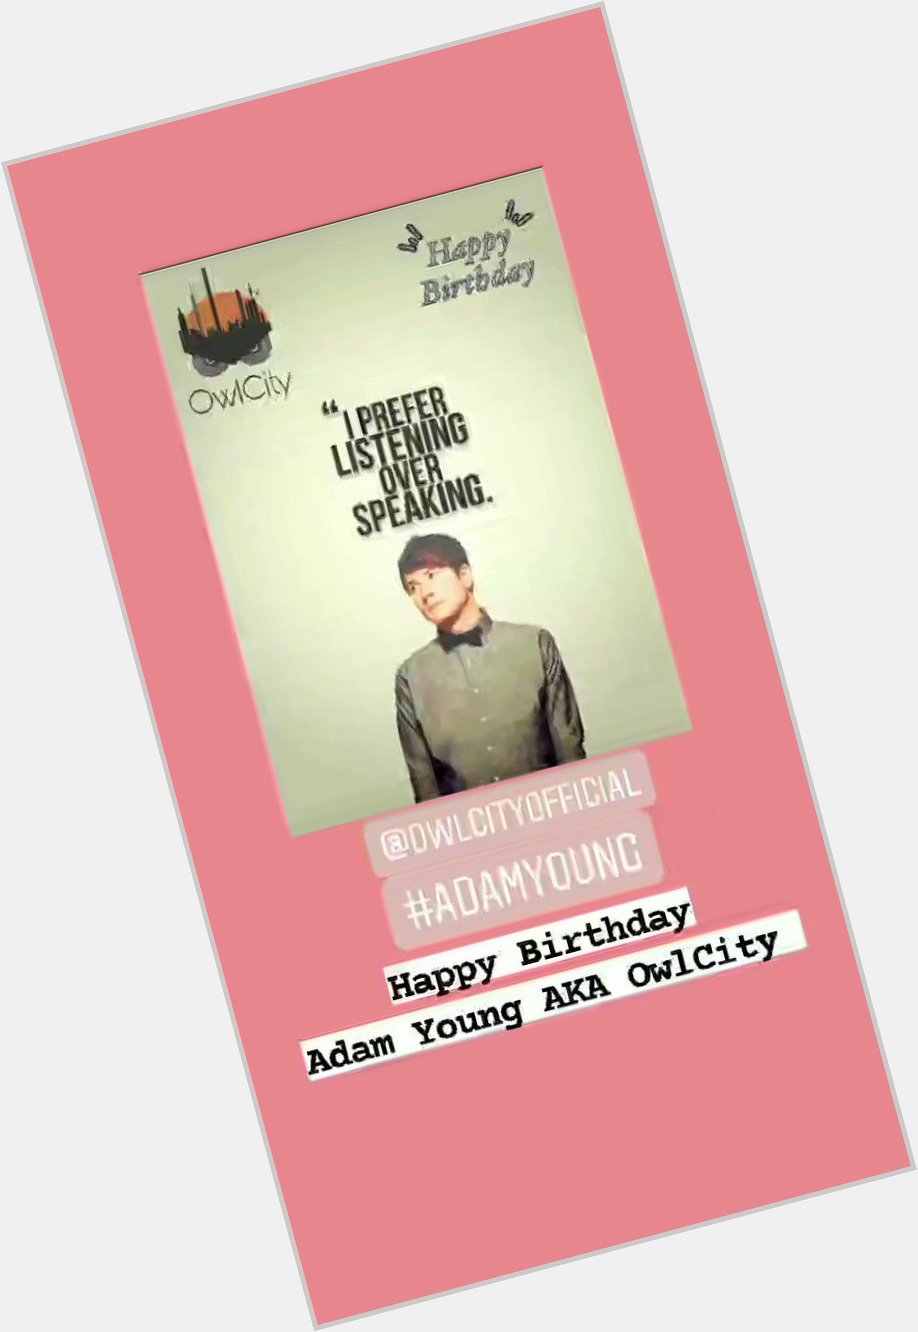 Happy birthday adam young Aka thank you for bringing wonderful music to this world  